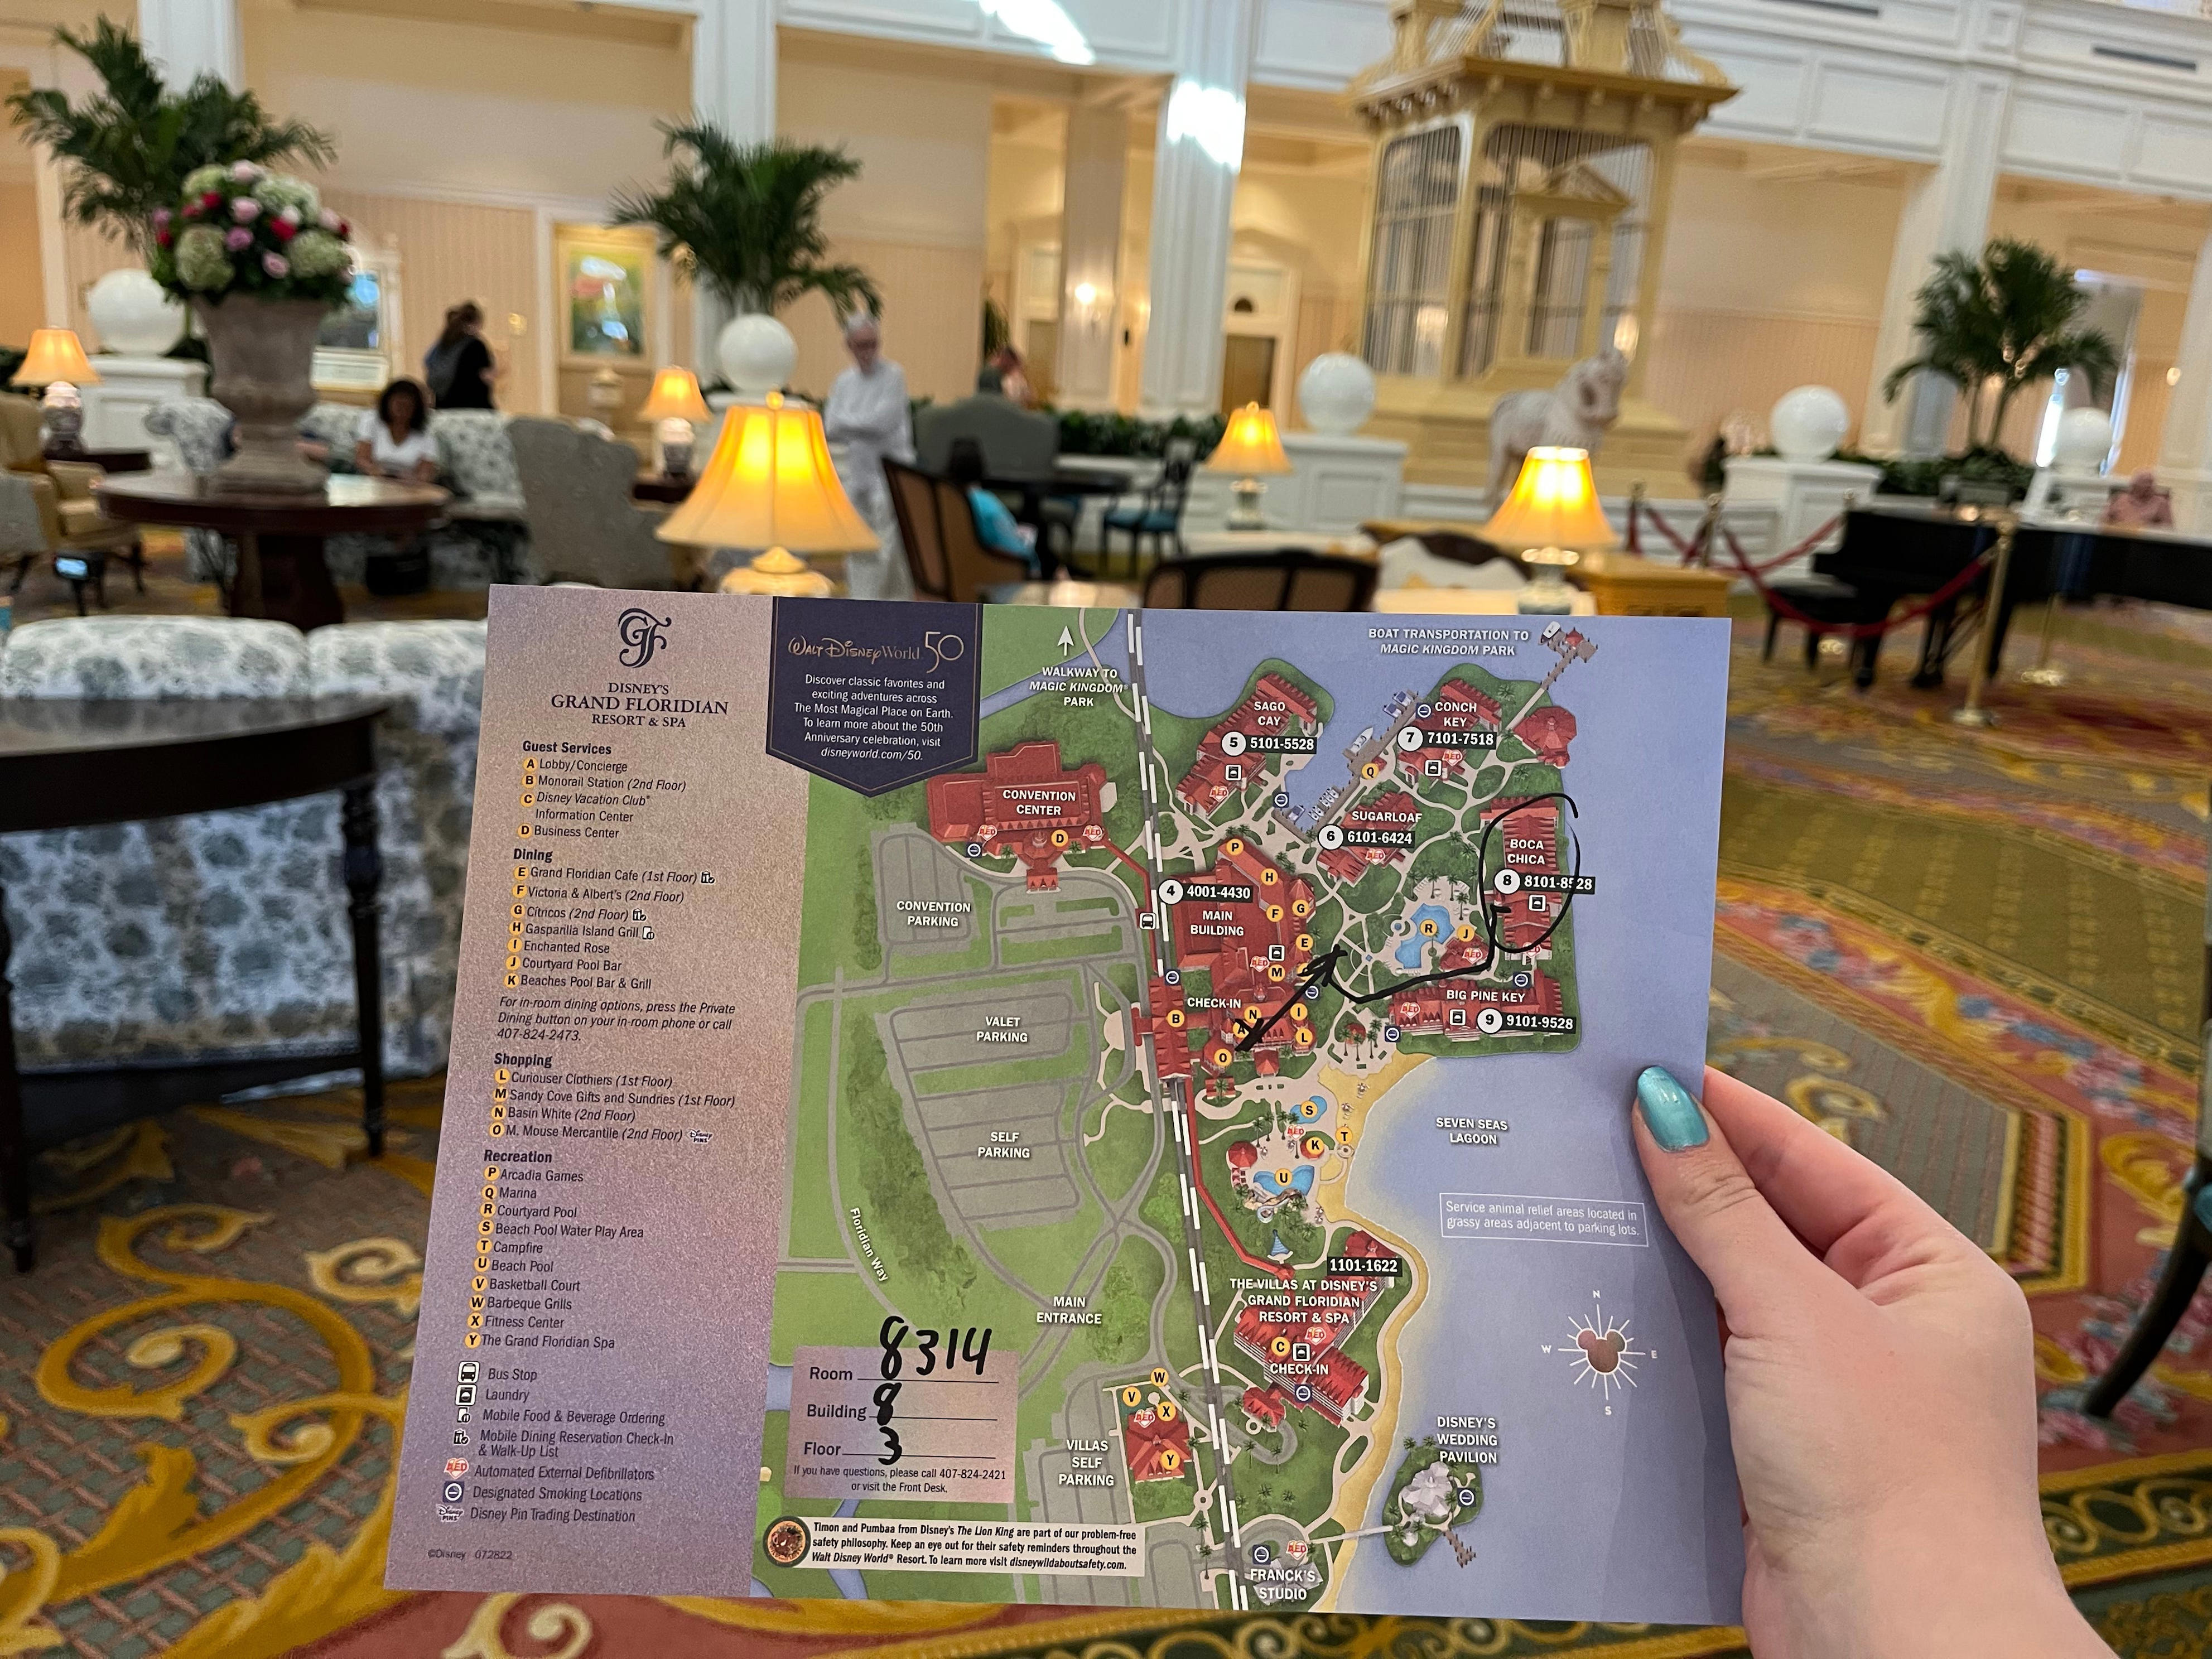 <p>Before leaving the desk, the employee handed me a map of the resort and circled the building we'd be staying in. </p>